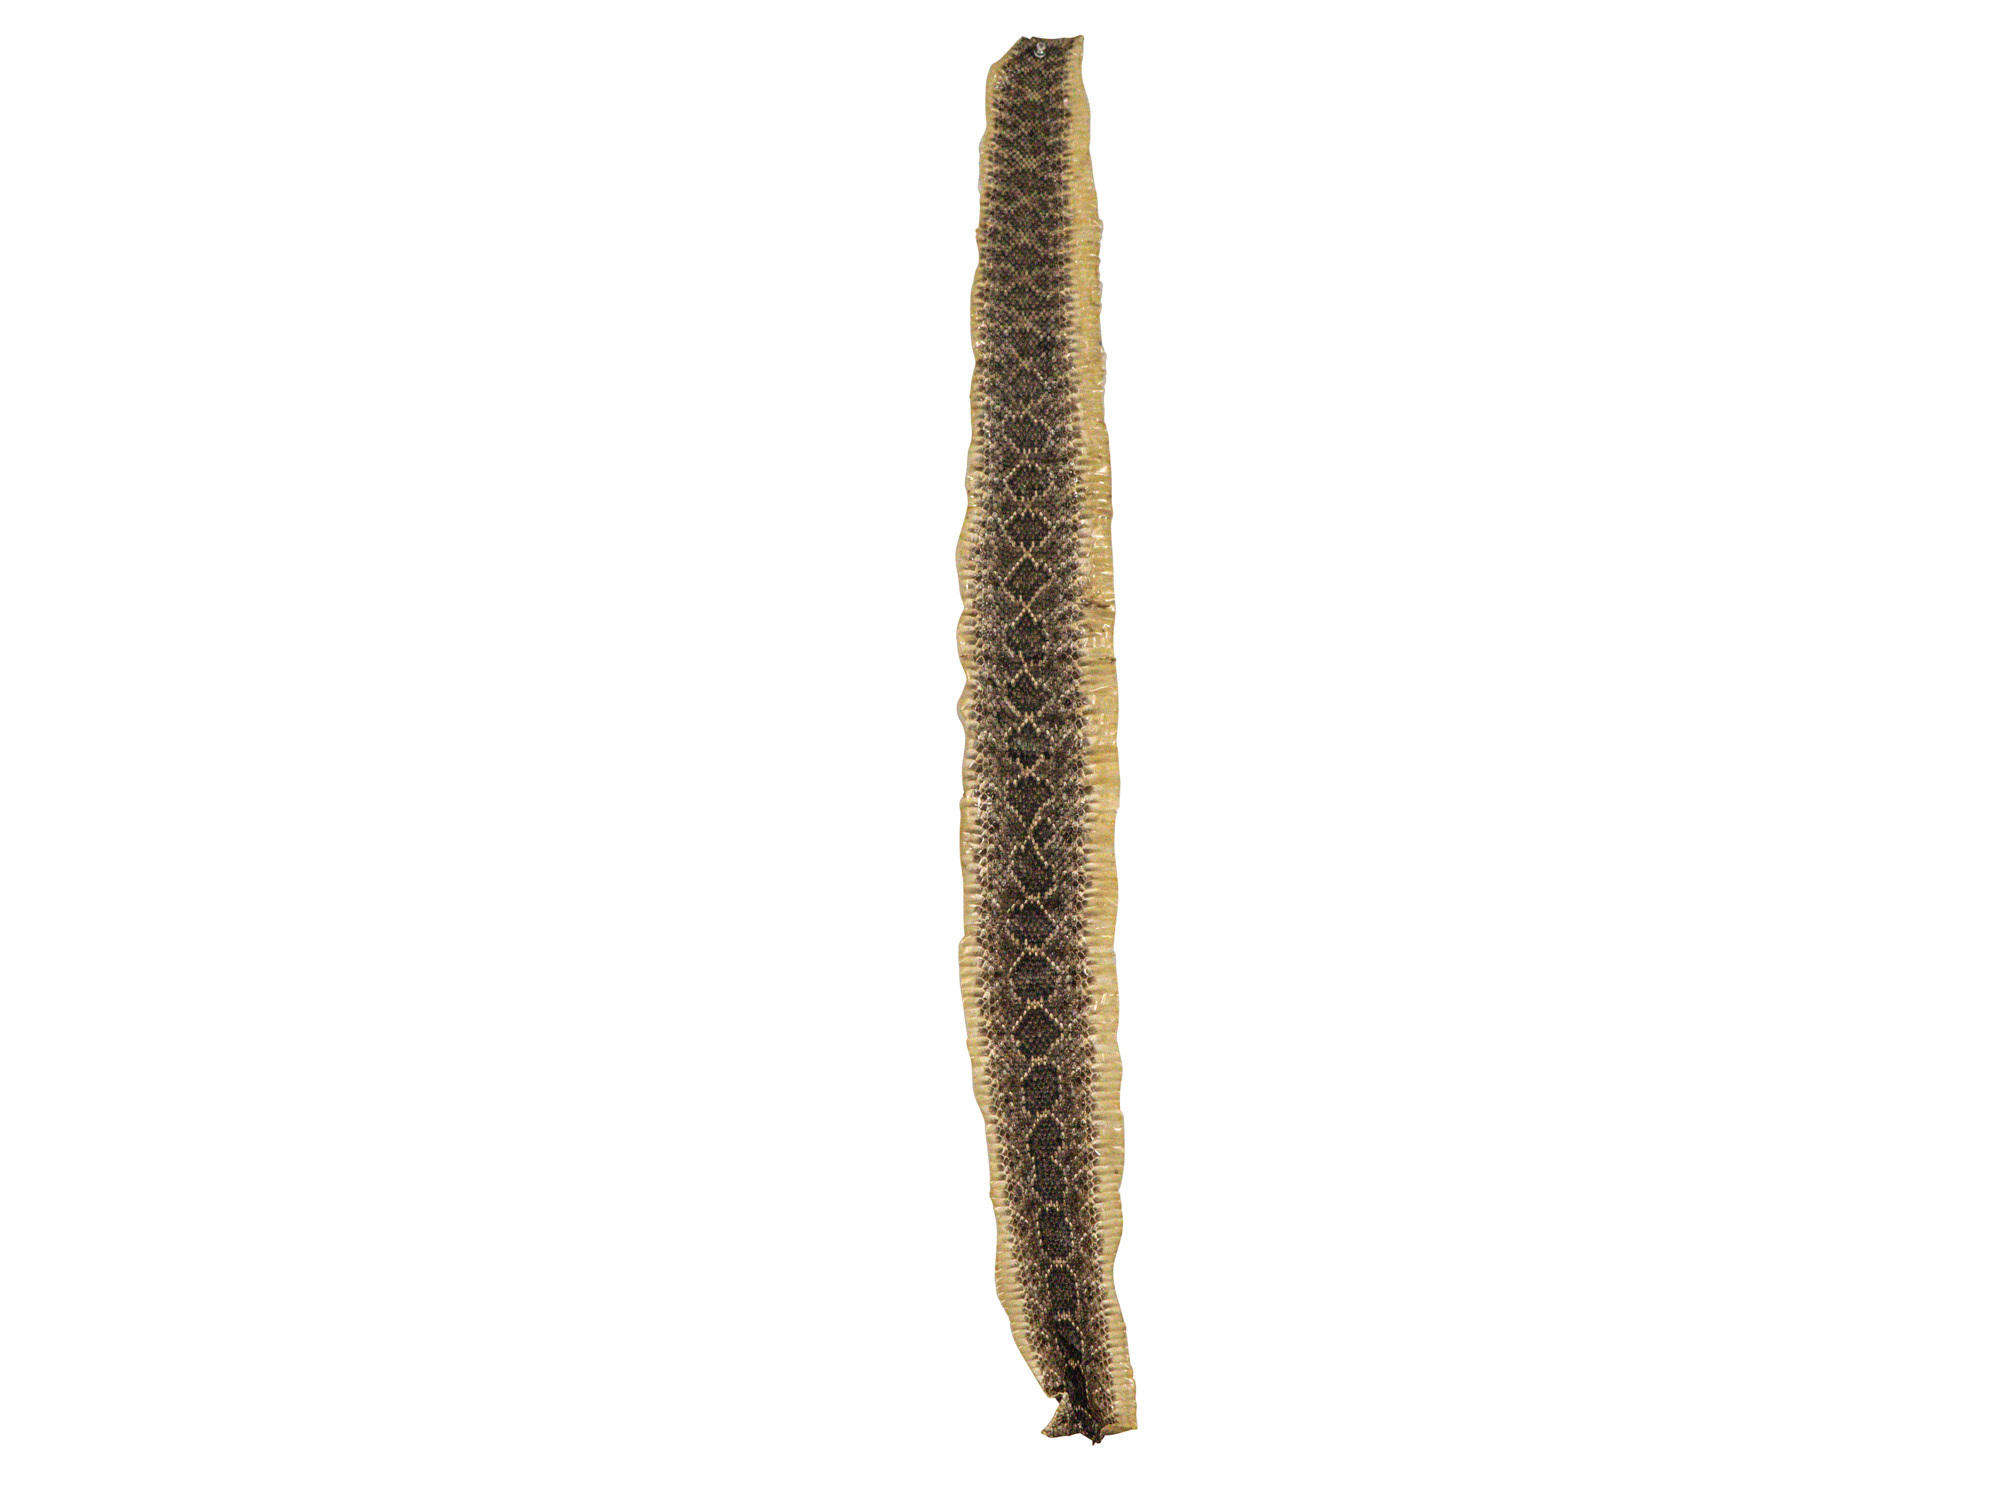 Rattlesnake Skin with No Rattle: 38" to 43" 